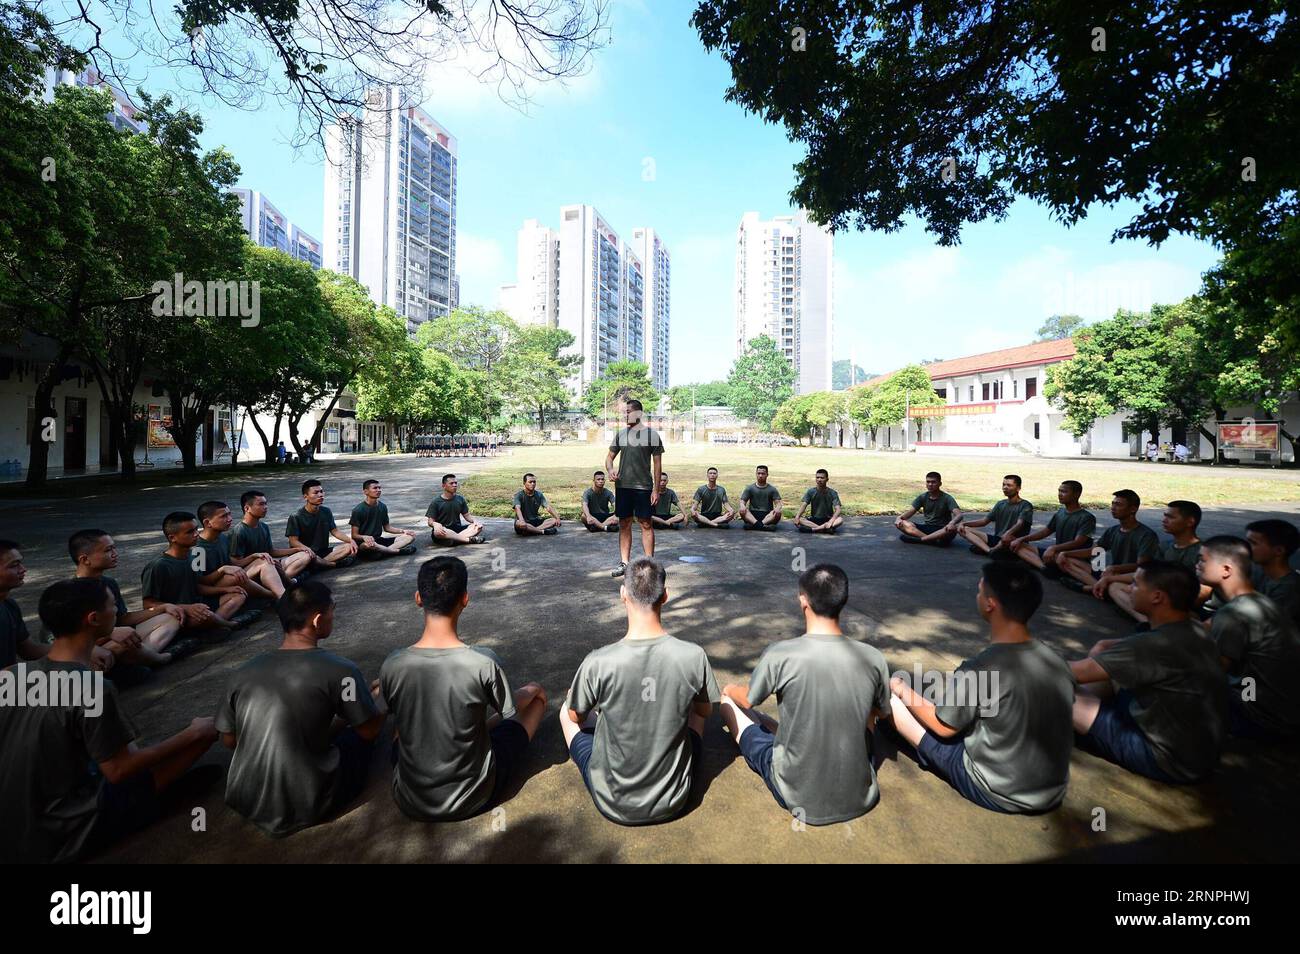 (170830) -- LIUZHOU, Aug. 30, 2017 -- Deng Feng (C) tells his former experience in the army during a training in Liuzhou, south China s Guangxi Zhuang Autonomous Region, Aug. 30, 2017. Deng, 24, who just graduated from Xingjian College of Science and Liberal Arts of Guangxi University, has signed for the army twice. When he was a freshman, Deng Feng was for the first time recruited as a soldier of Guangxi Frontier Corps of Chinese Armed Police and was on service for two years. Deng Feng then left army and went back to Guangxi University until he finished his study. Upon graduation, however, De Stock Photo